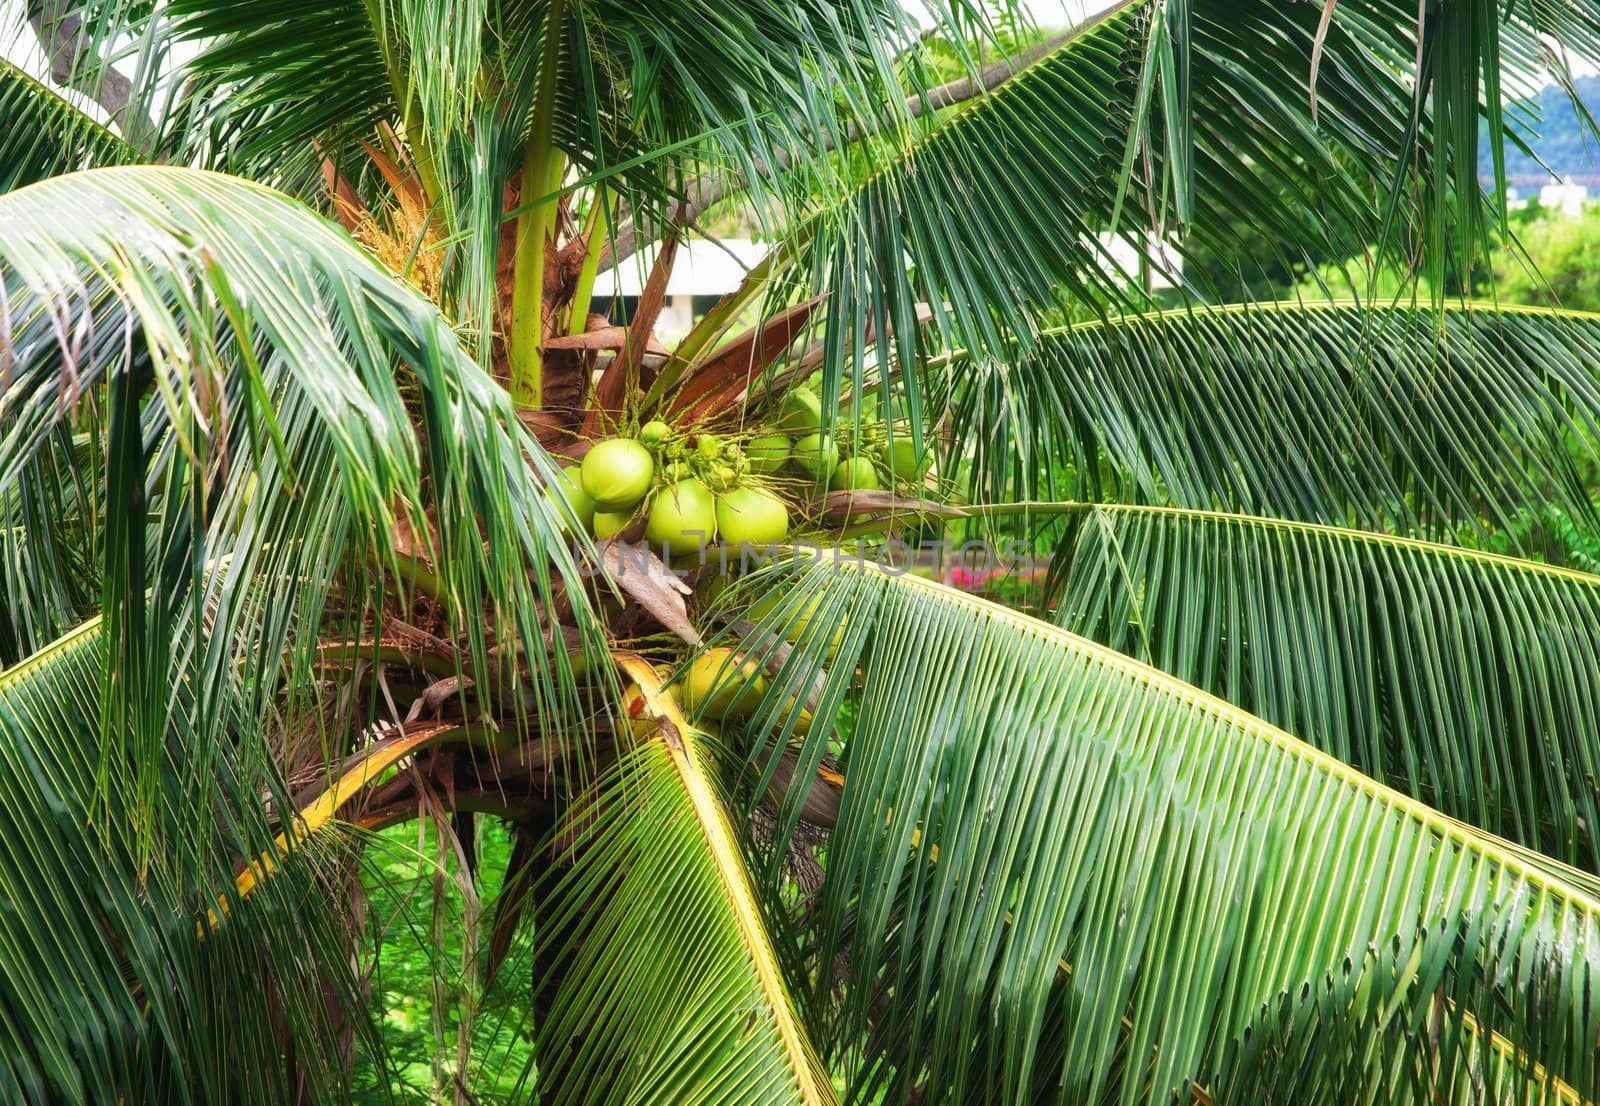 coconuts growing in this palm tree in thailand